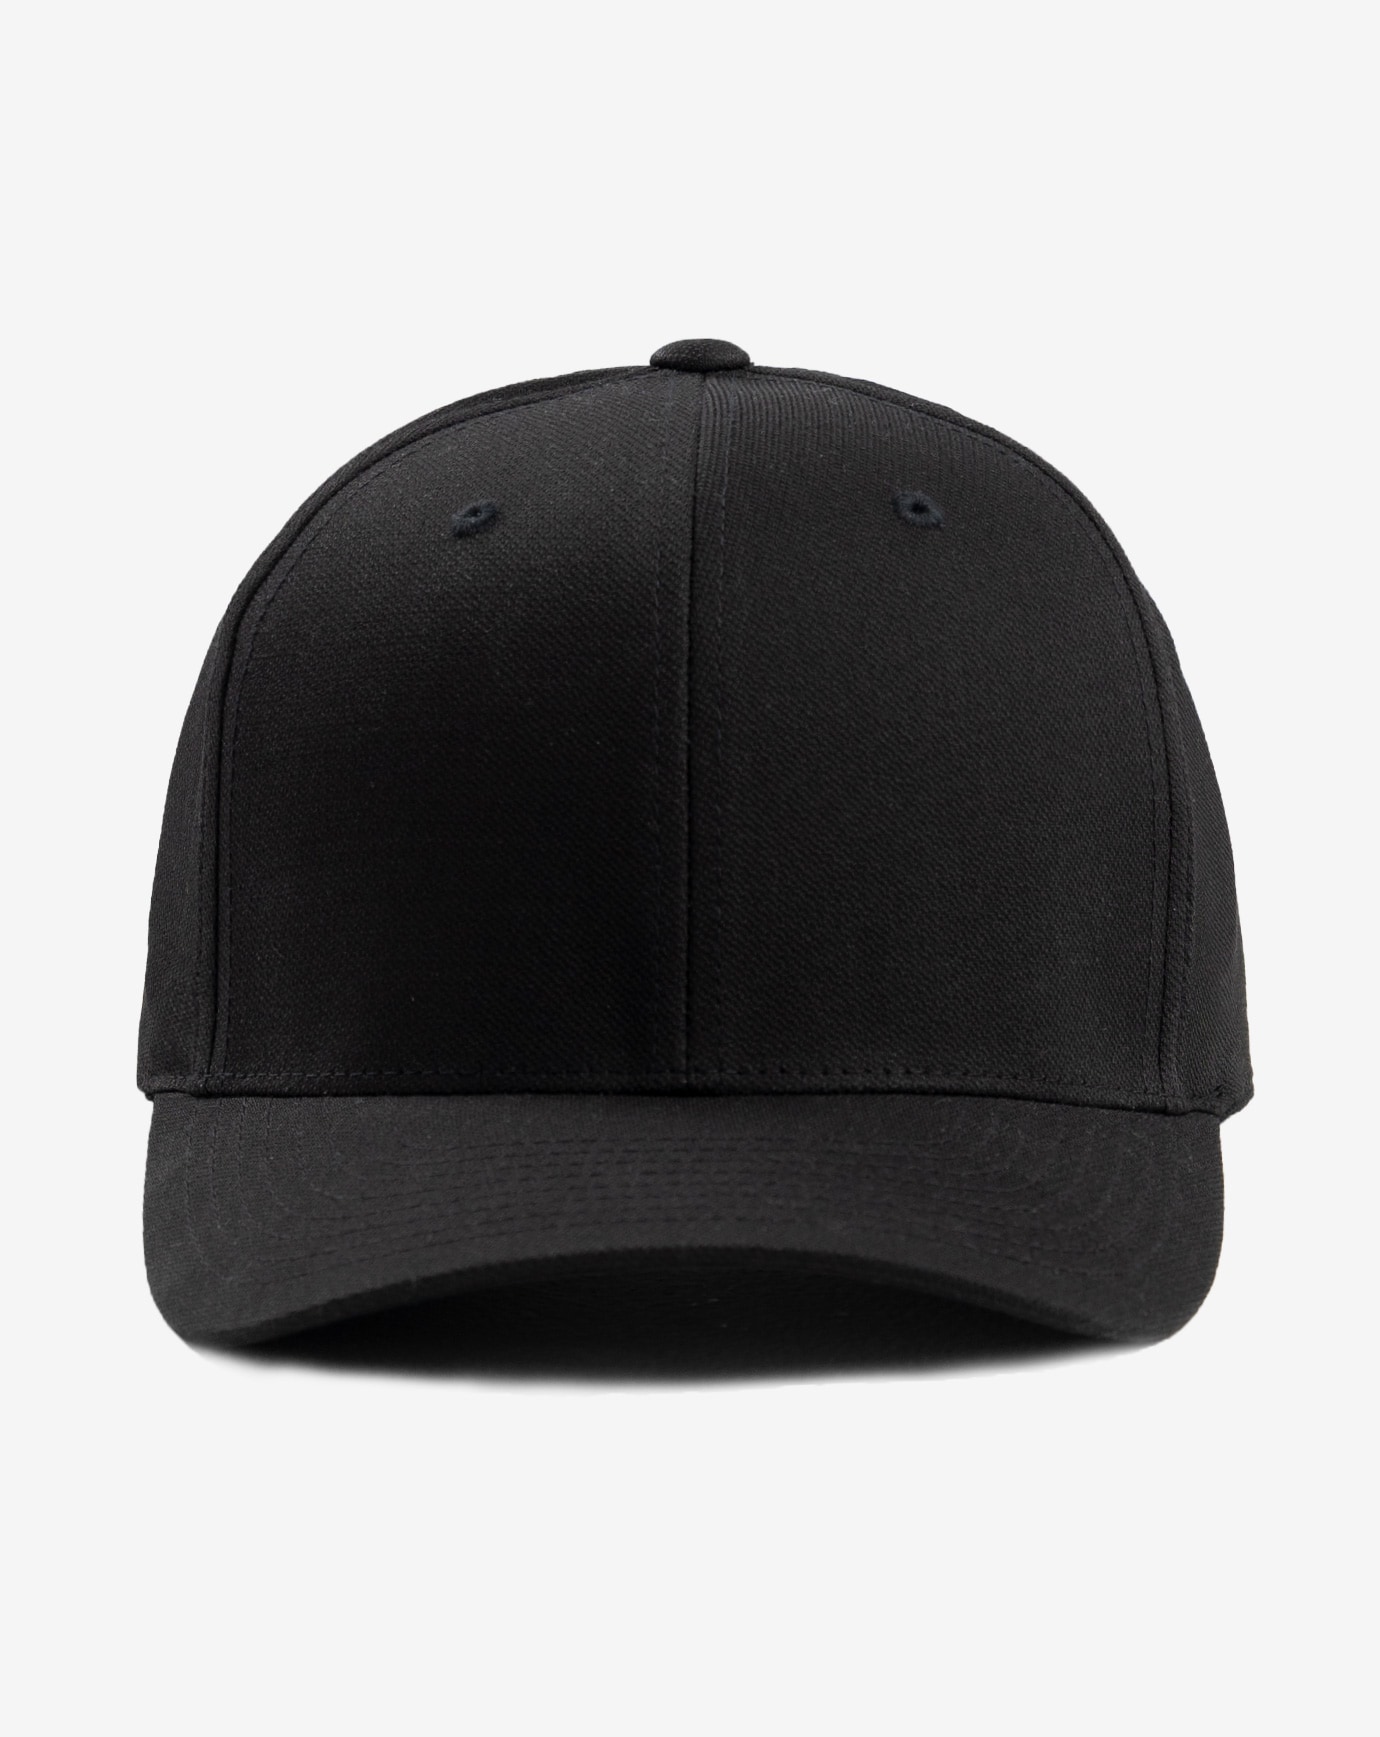 Related Product - ECLIPSE SNAPBACK HAT